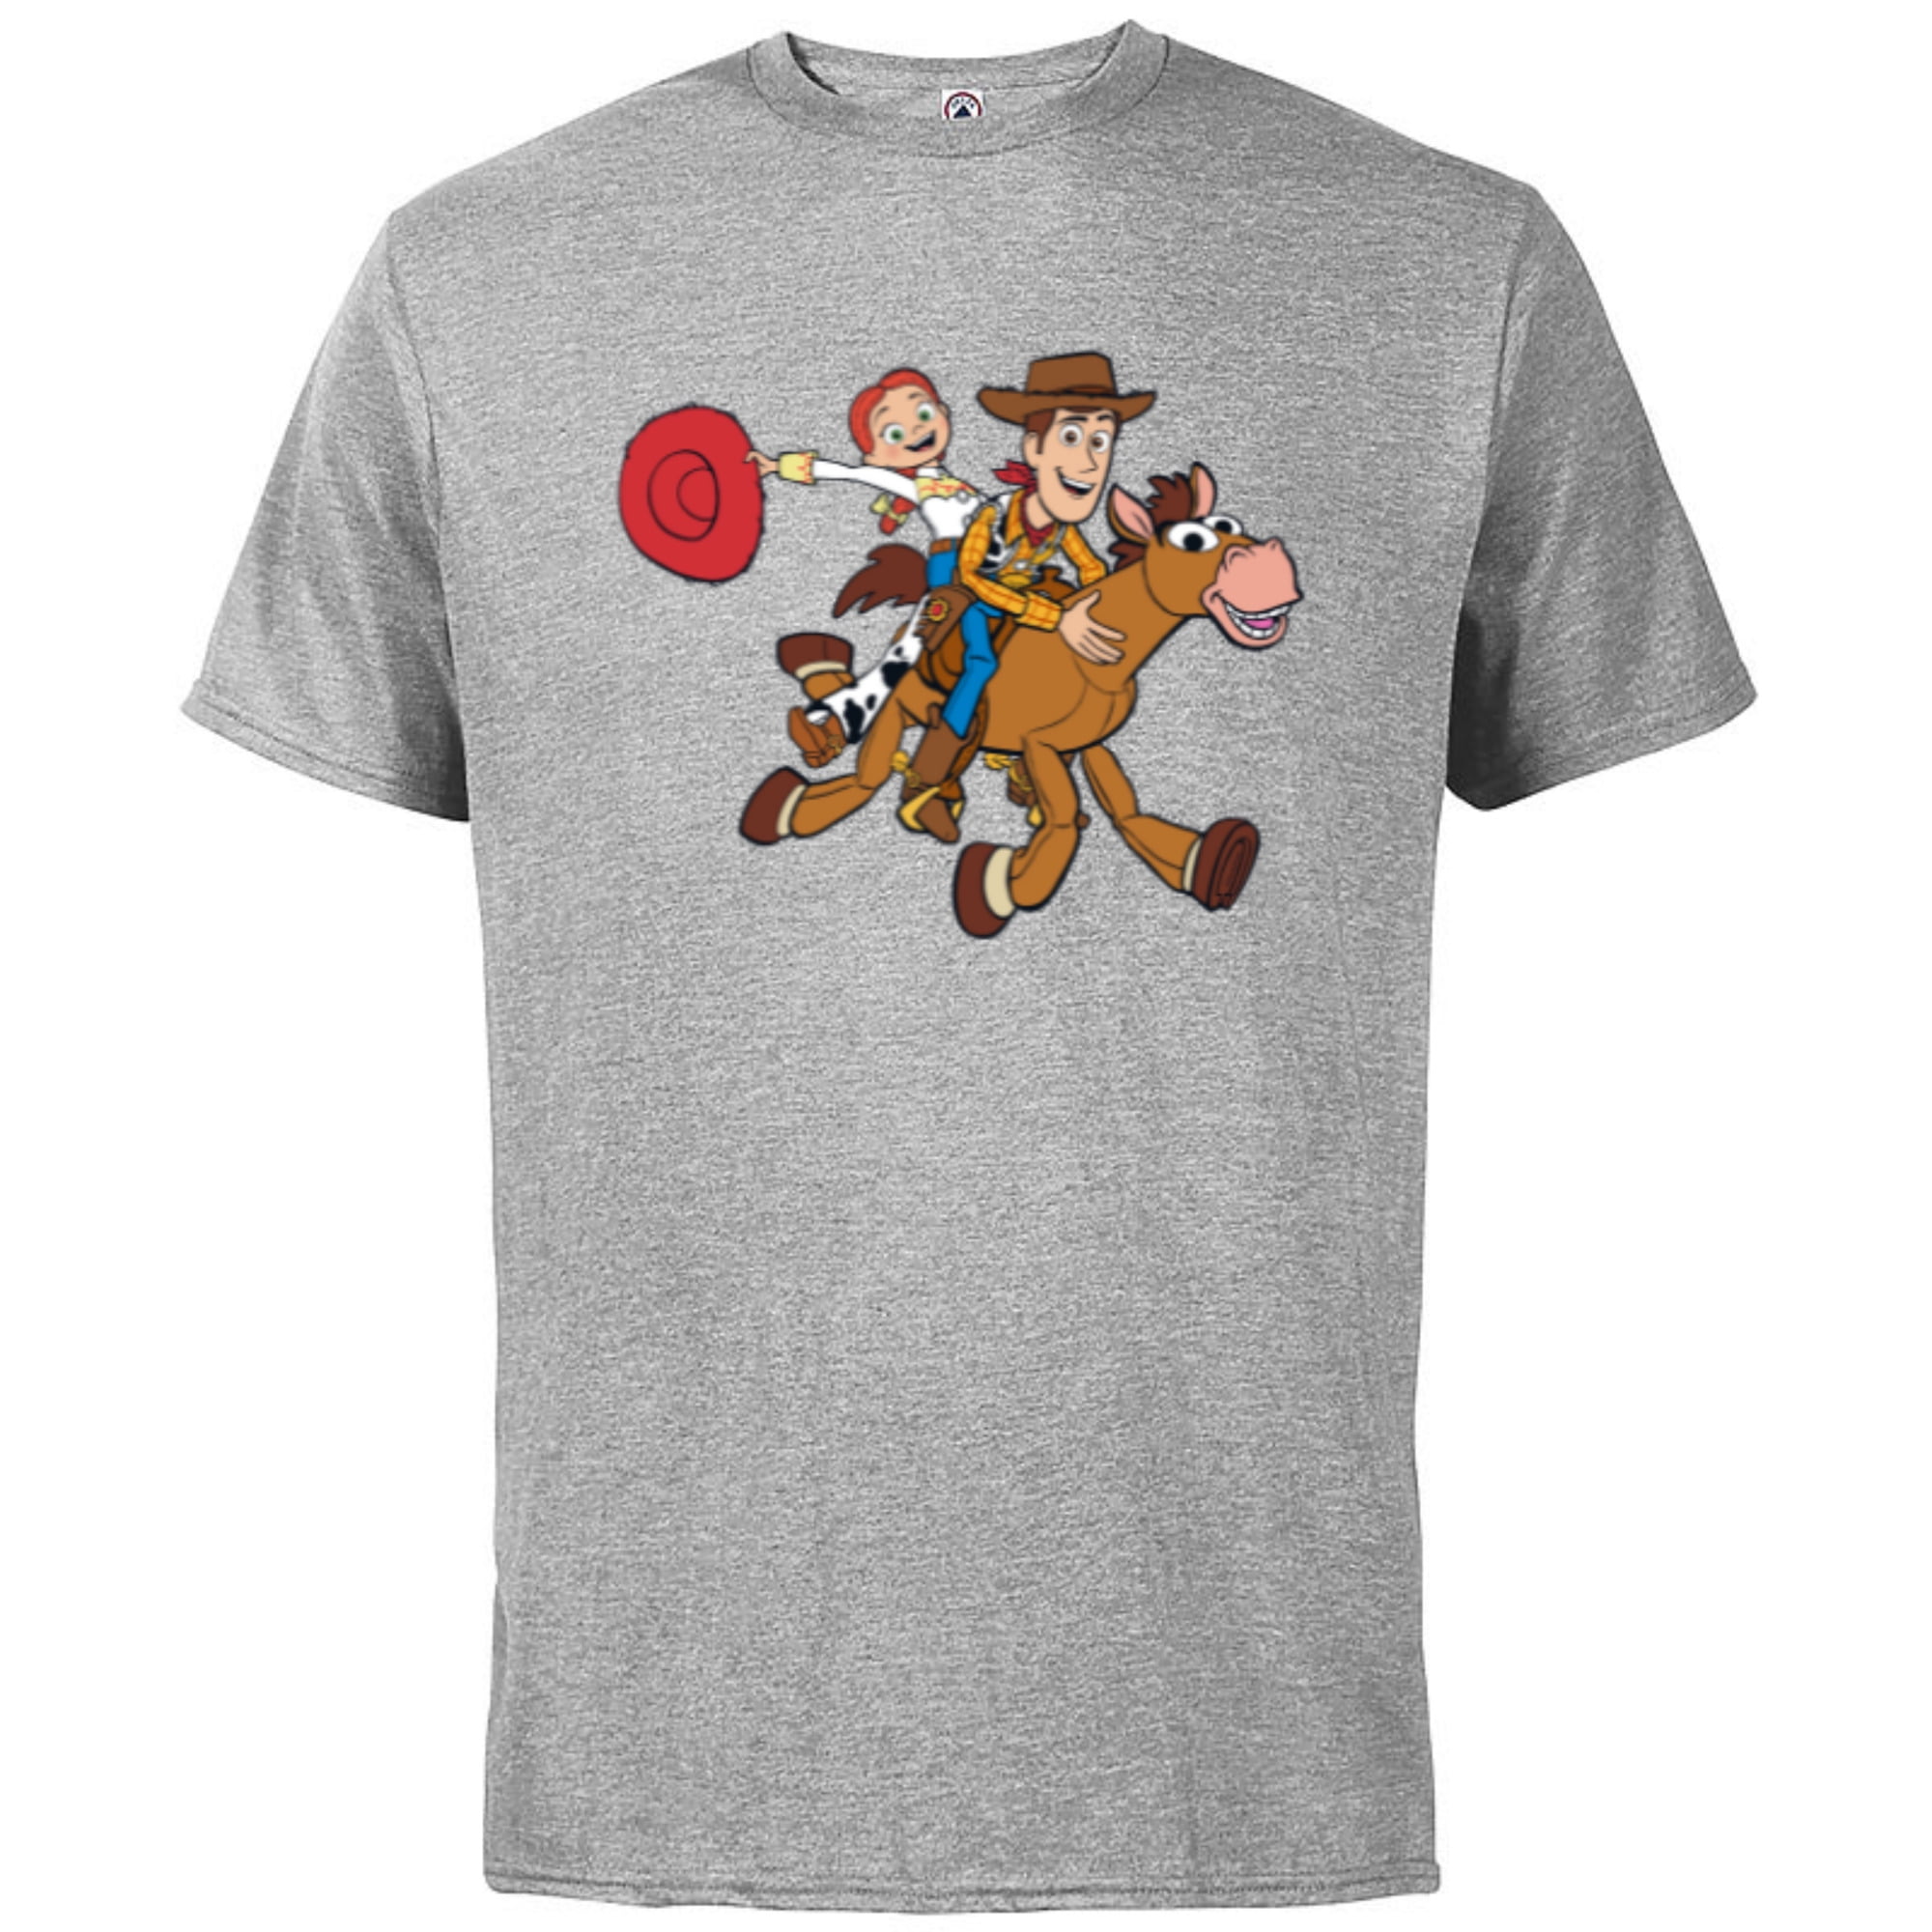 Disney and Pixar's Toy Story Woody Jessie Bullseye - Short Sleeve Cotton T- Shirt for Adults - Customized-Athletic Heather 